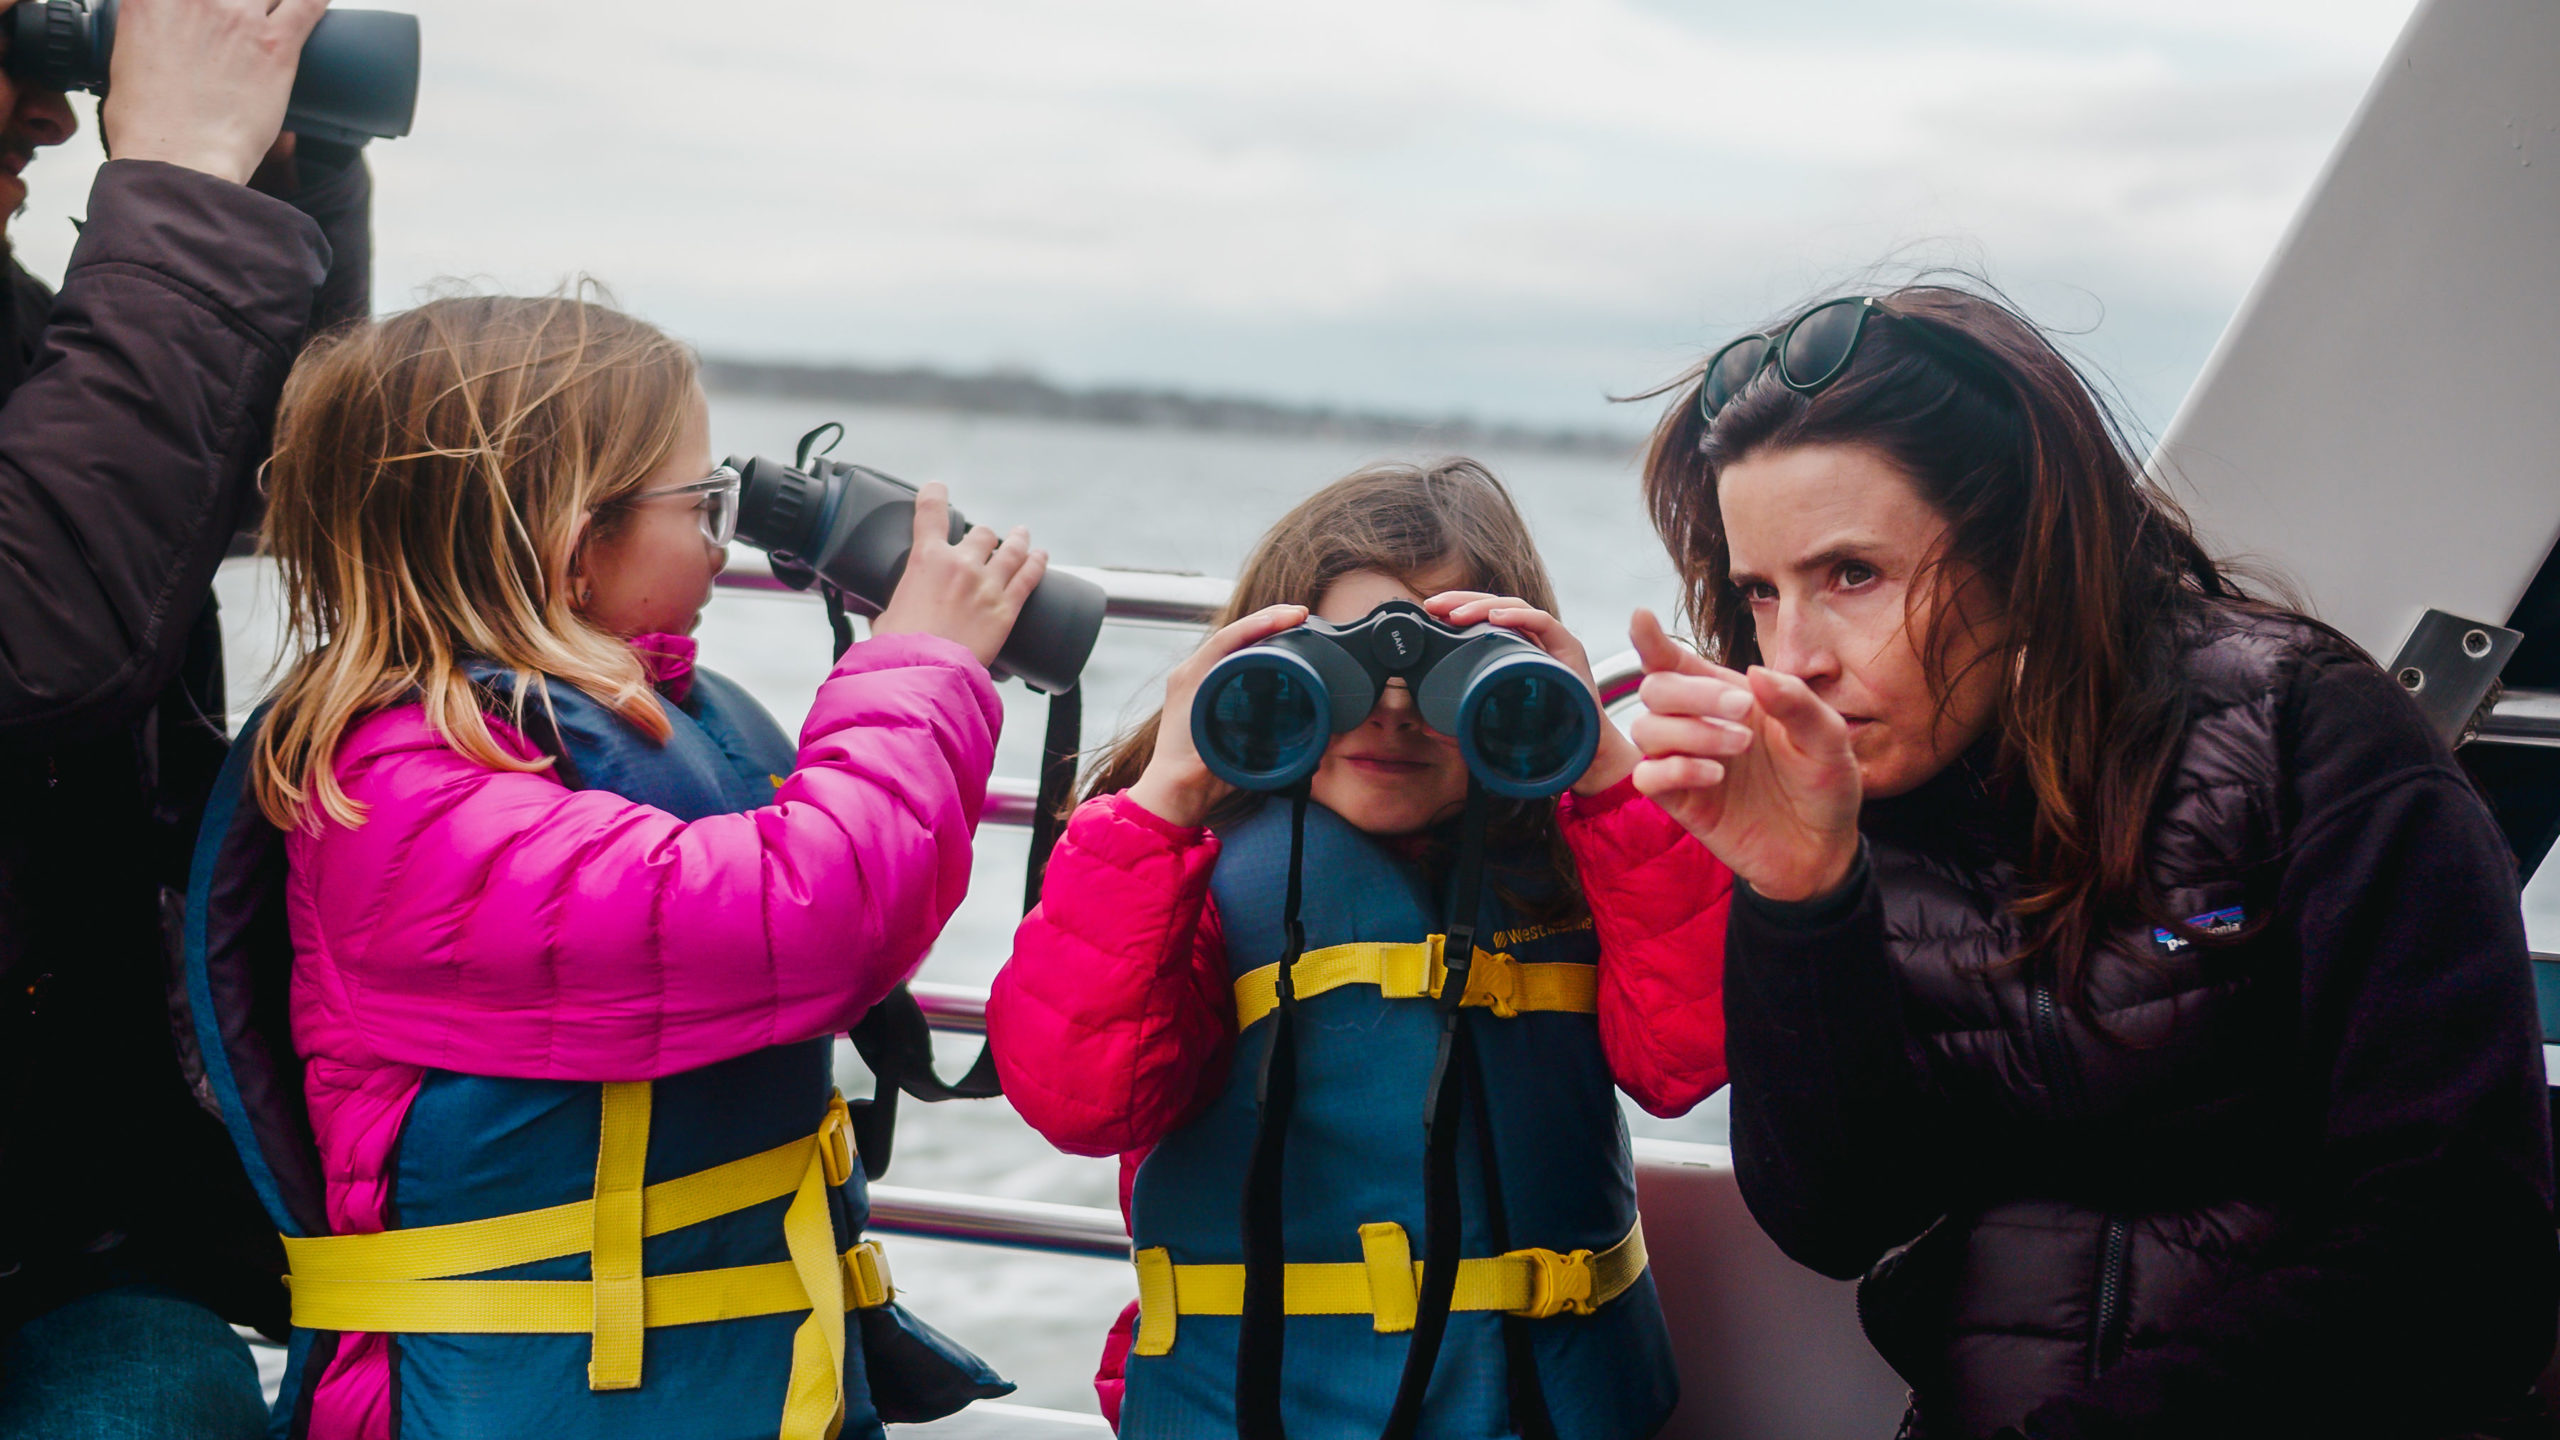 Two children wearing life jackets hold binoculars on board a STB education vesserl during a Seal Tour. An adult woman crouches nearby pointing off to the distance.